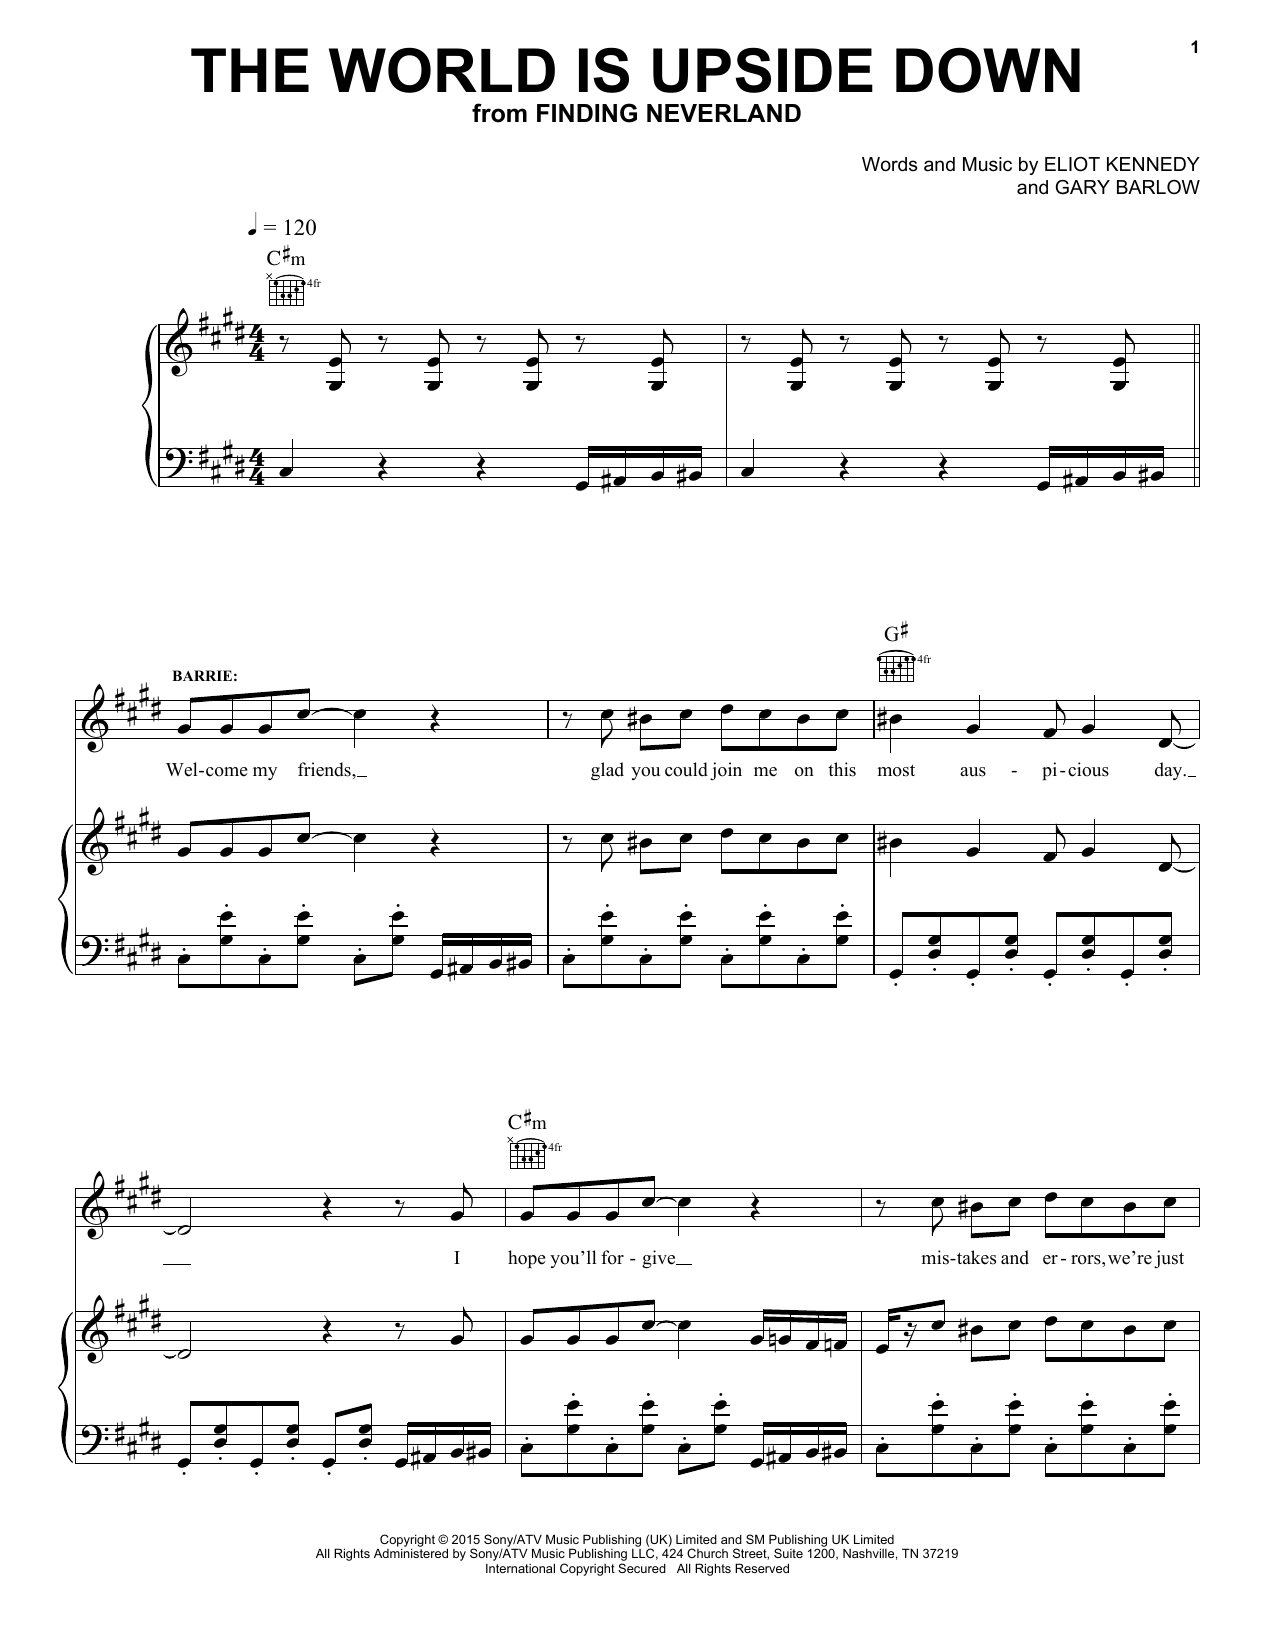 Download Gary Barlow & Eliot Kennedy The World Is Upside Down Sheet Music